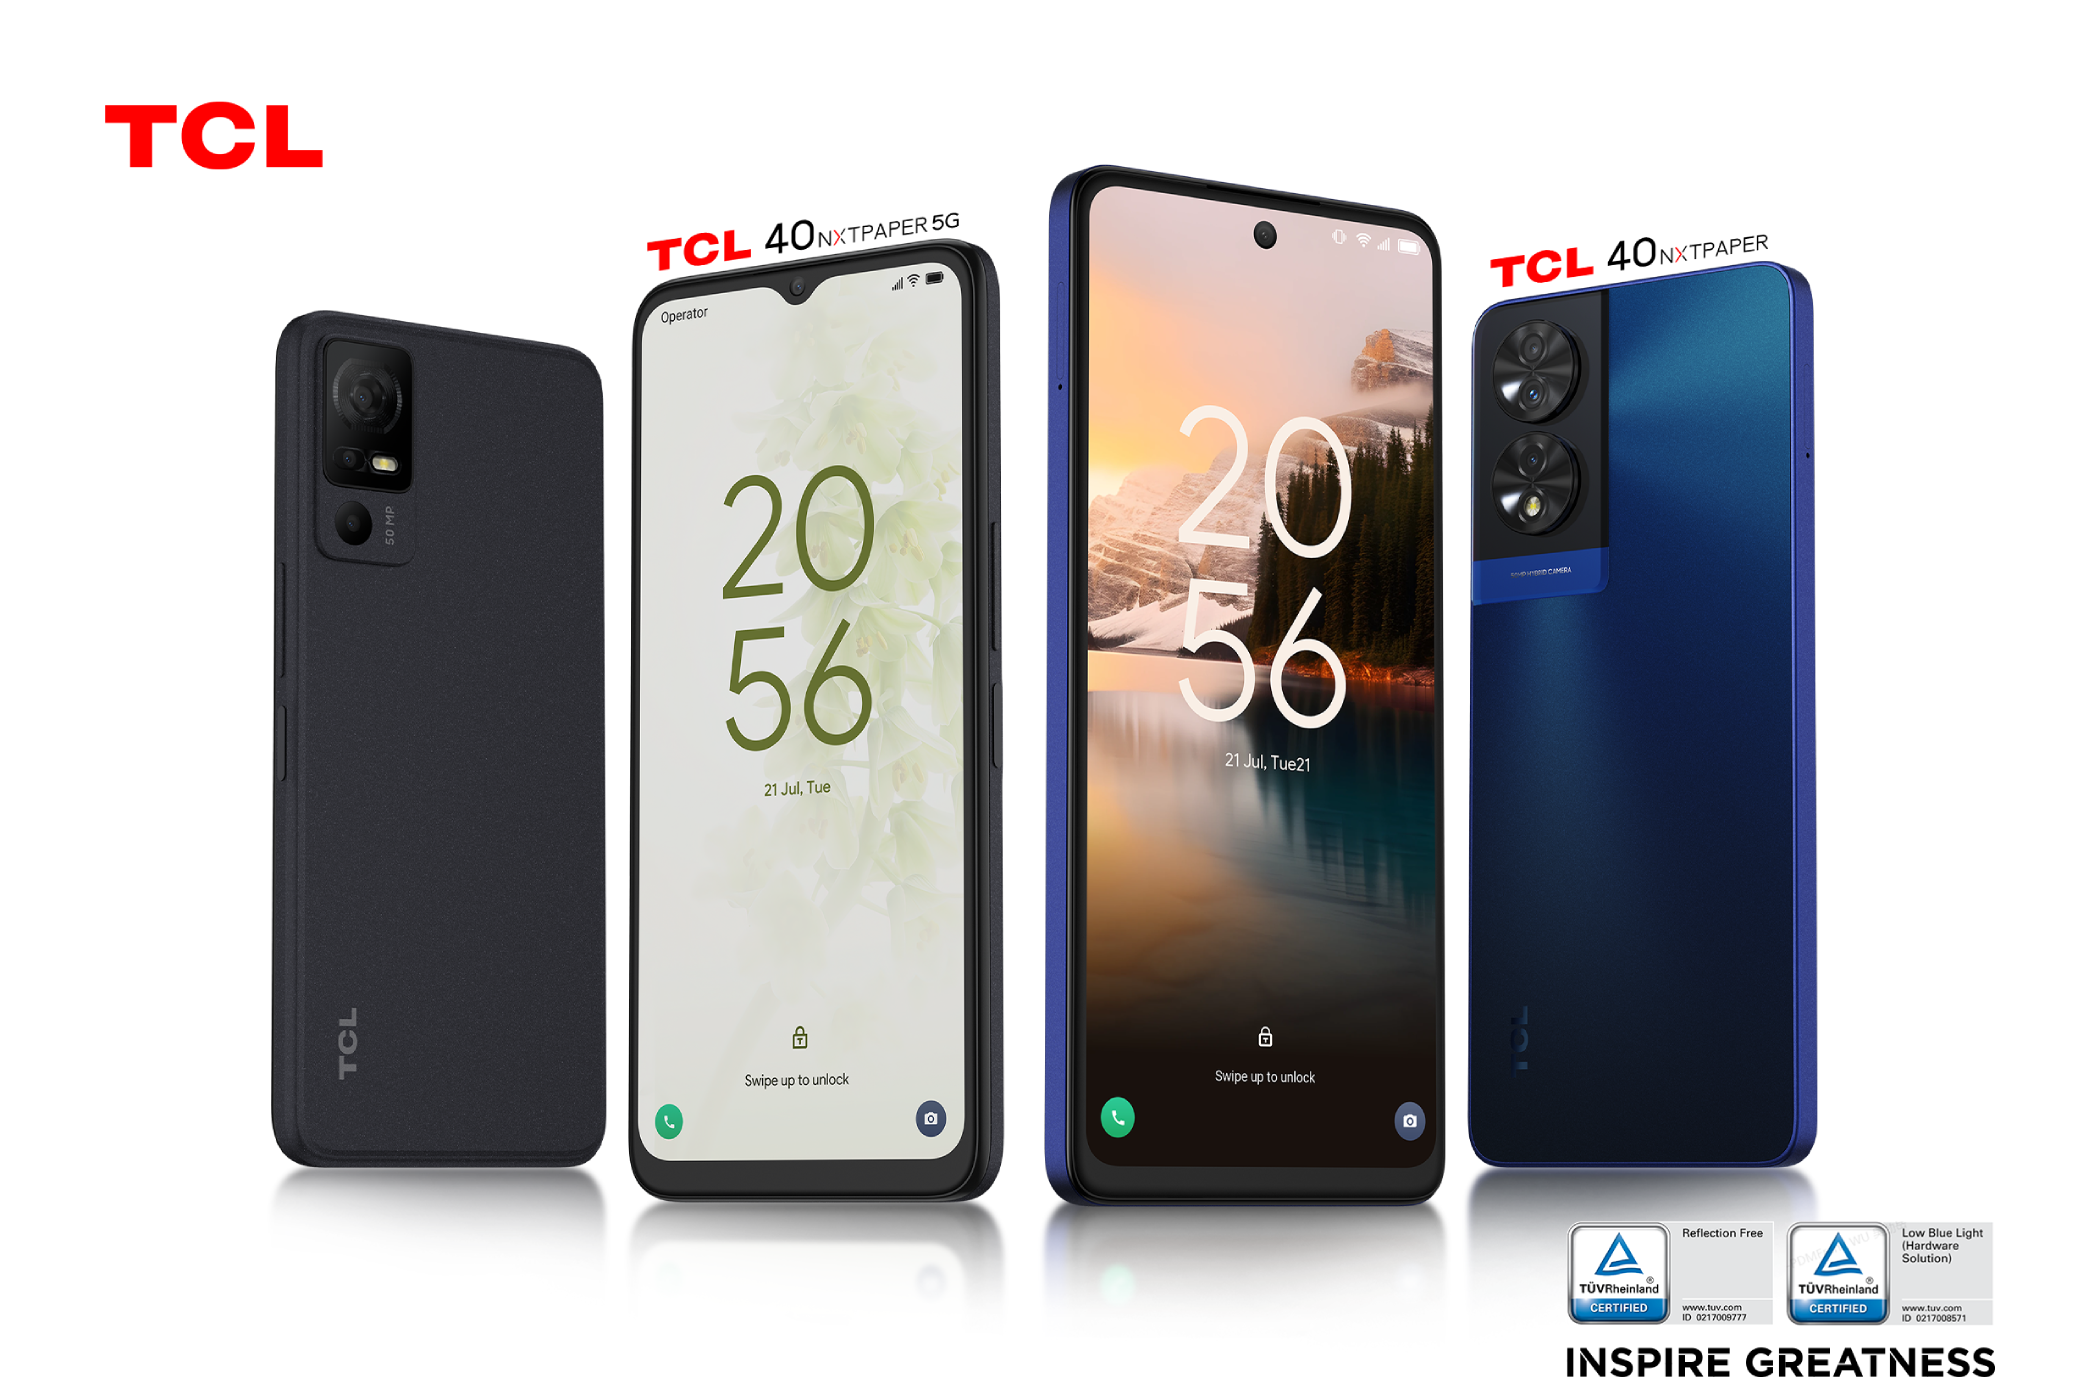 tcl-brings-its-nxtpaper-display-tech-to-its-latest-smartphones